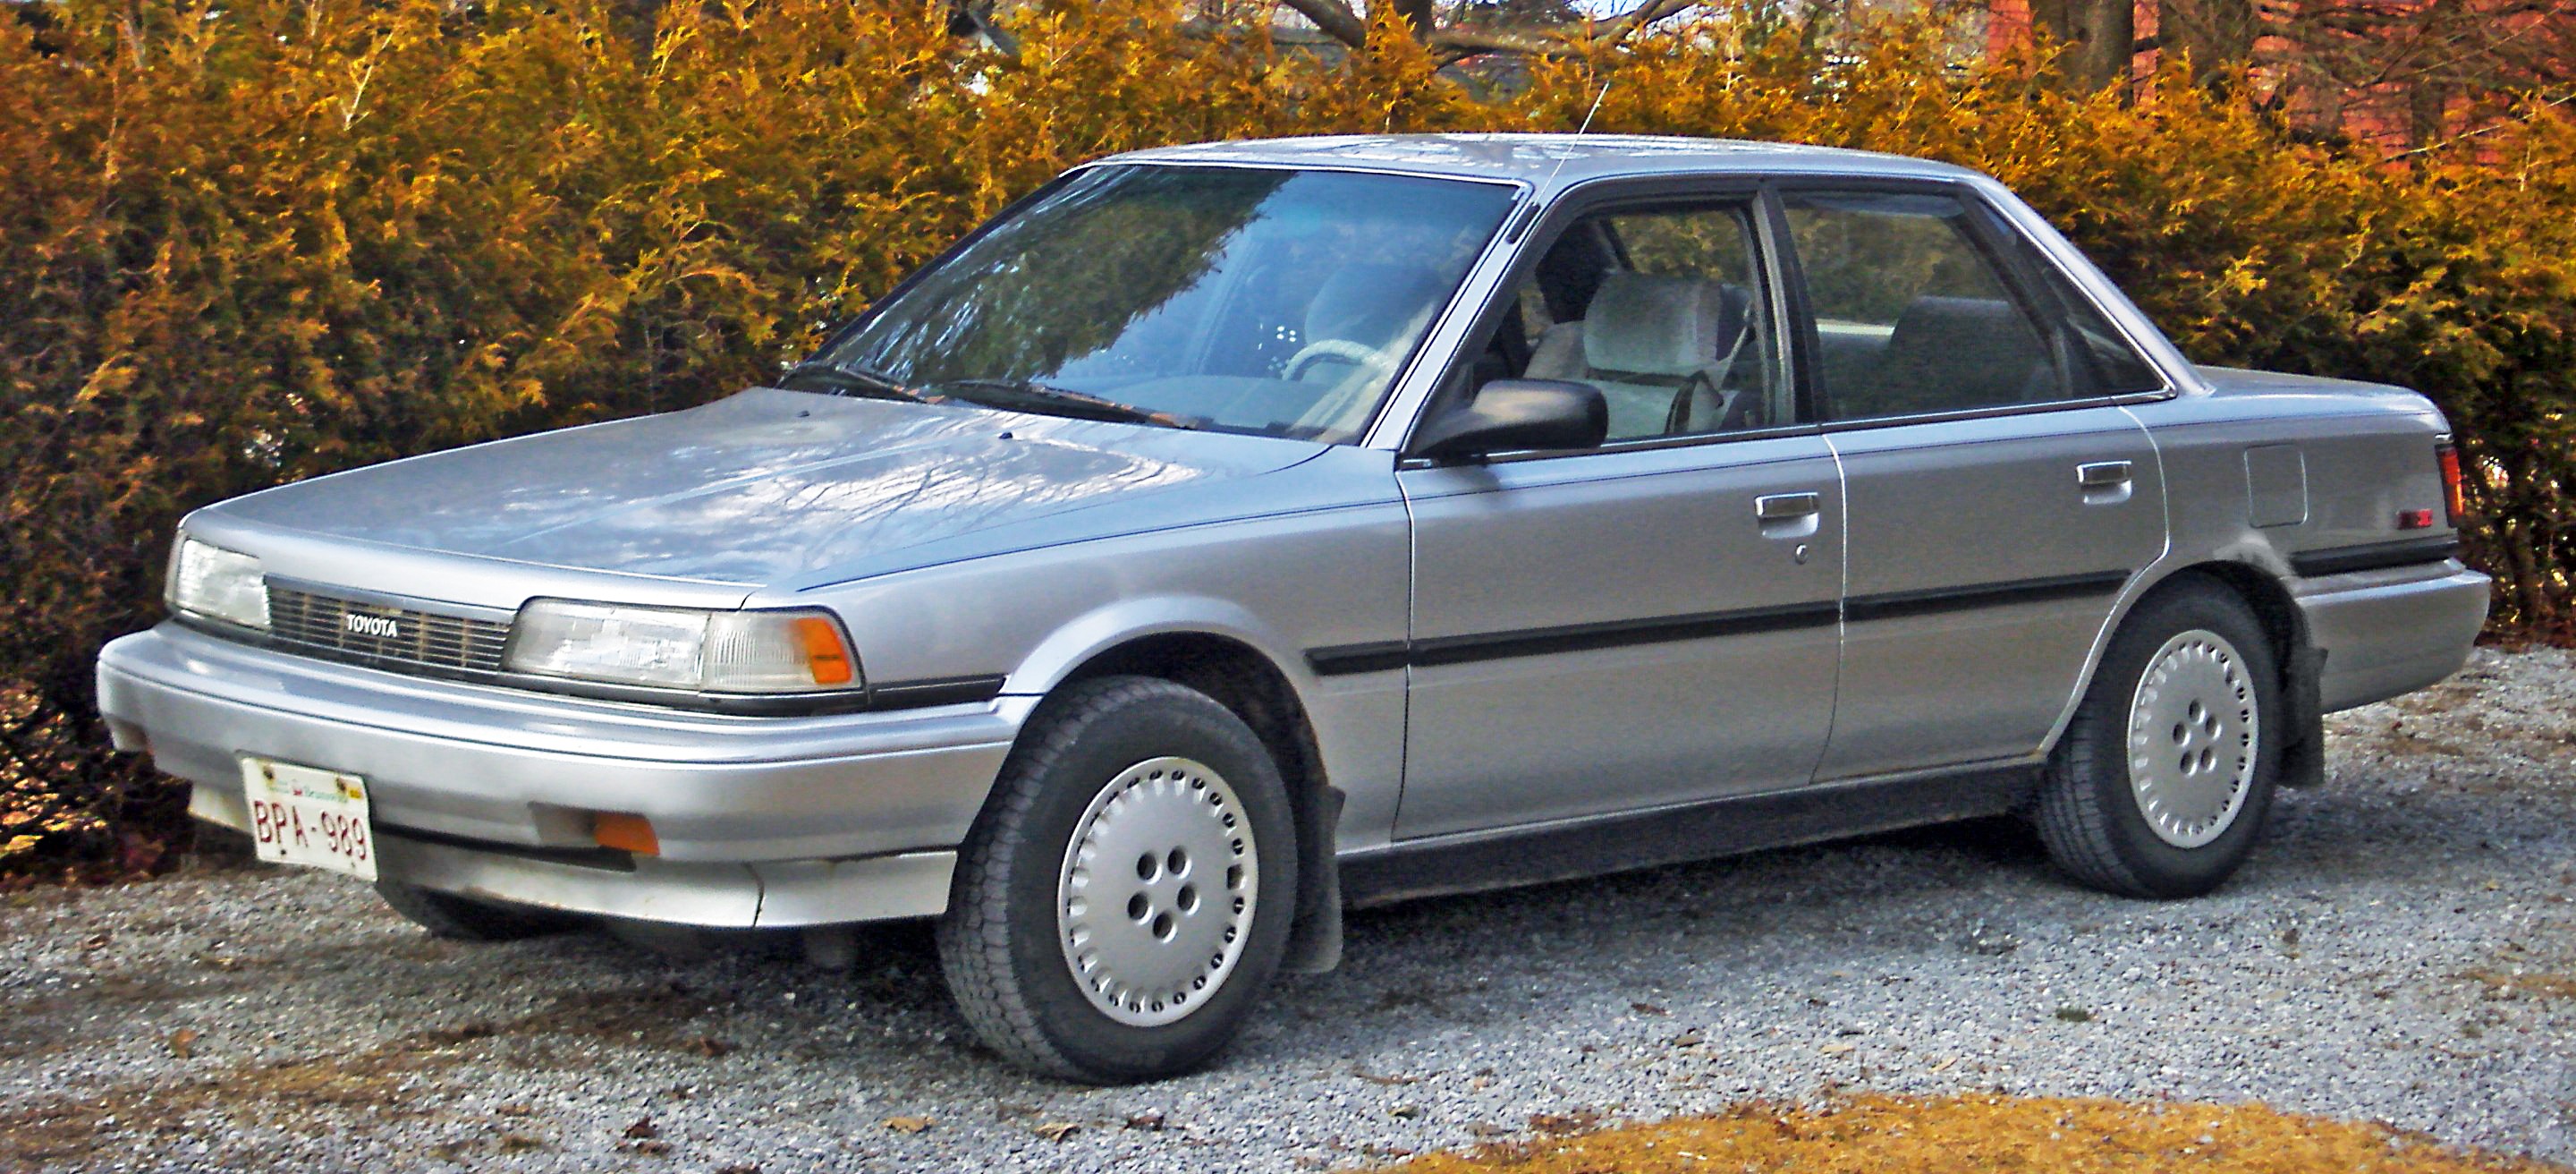 1992 toyota Camry Parts Diagram toyota Camry Wikiwand Of 1992 toyota Camry Parts Diagram